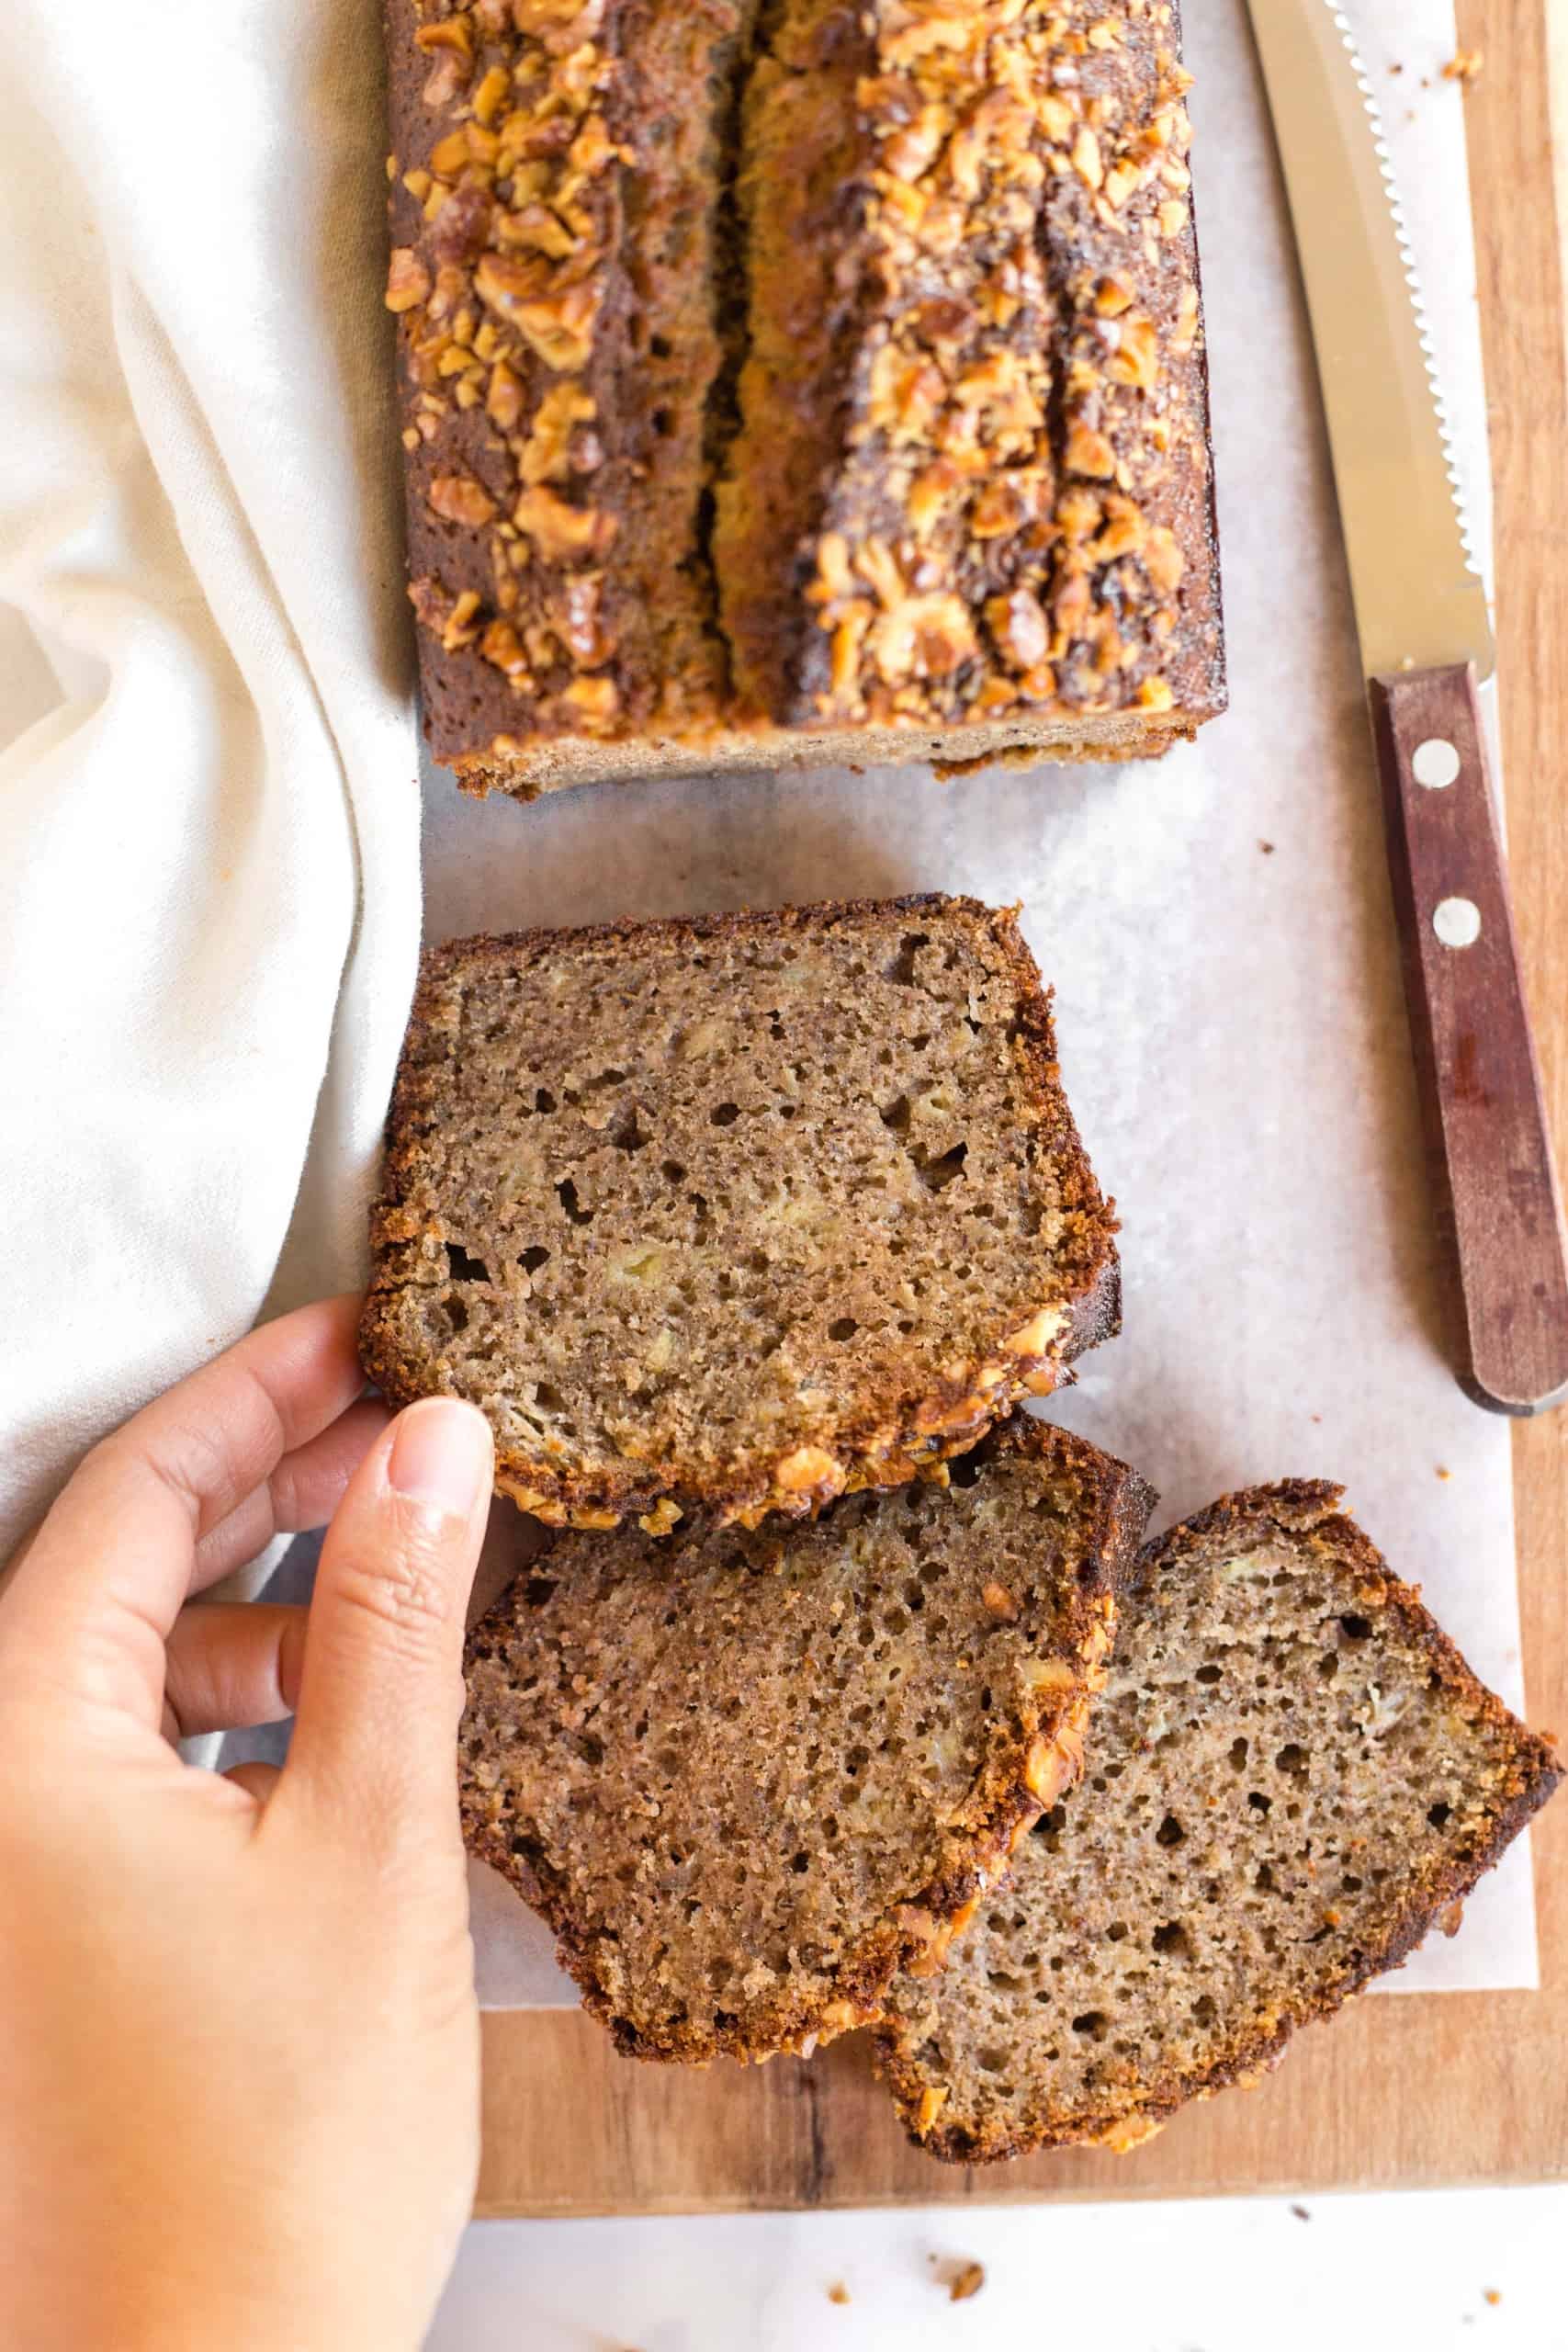 Reaching for a slice of buckwheat banana bread on parchment paper.